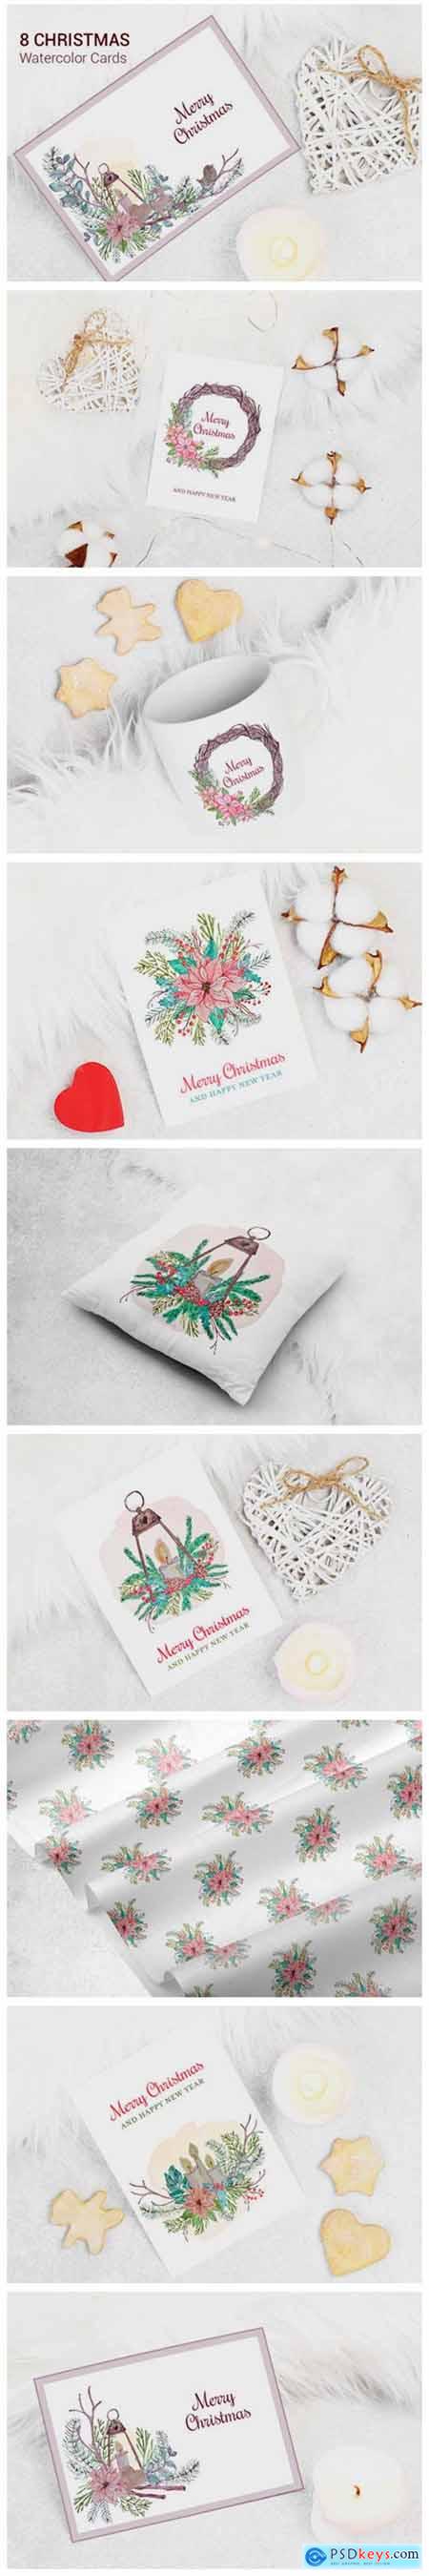 Merry Christmas Watercolor Greeting Card 1996765 » Free Download ...